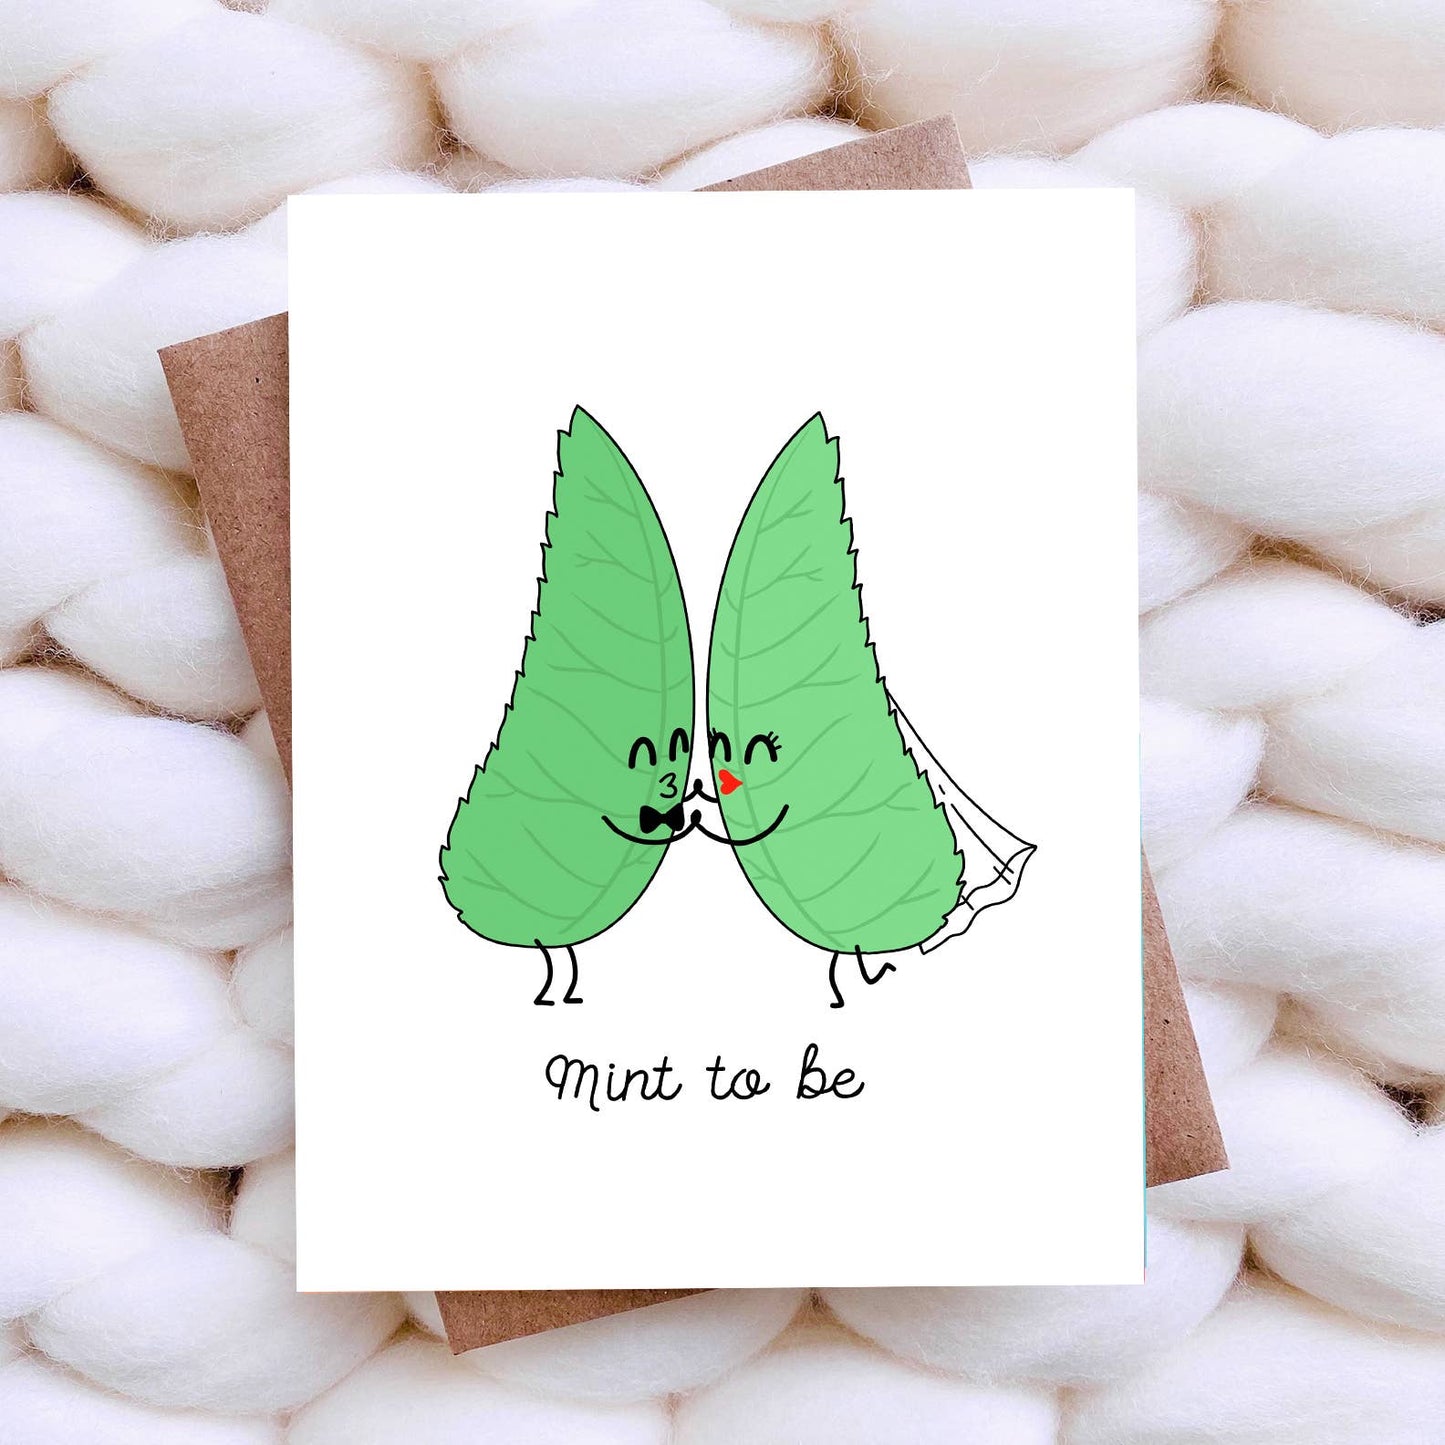 Mint to Be Wedding Card